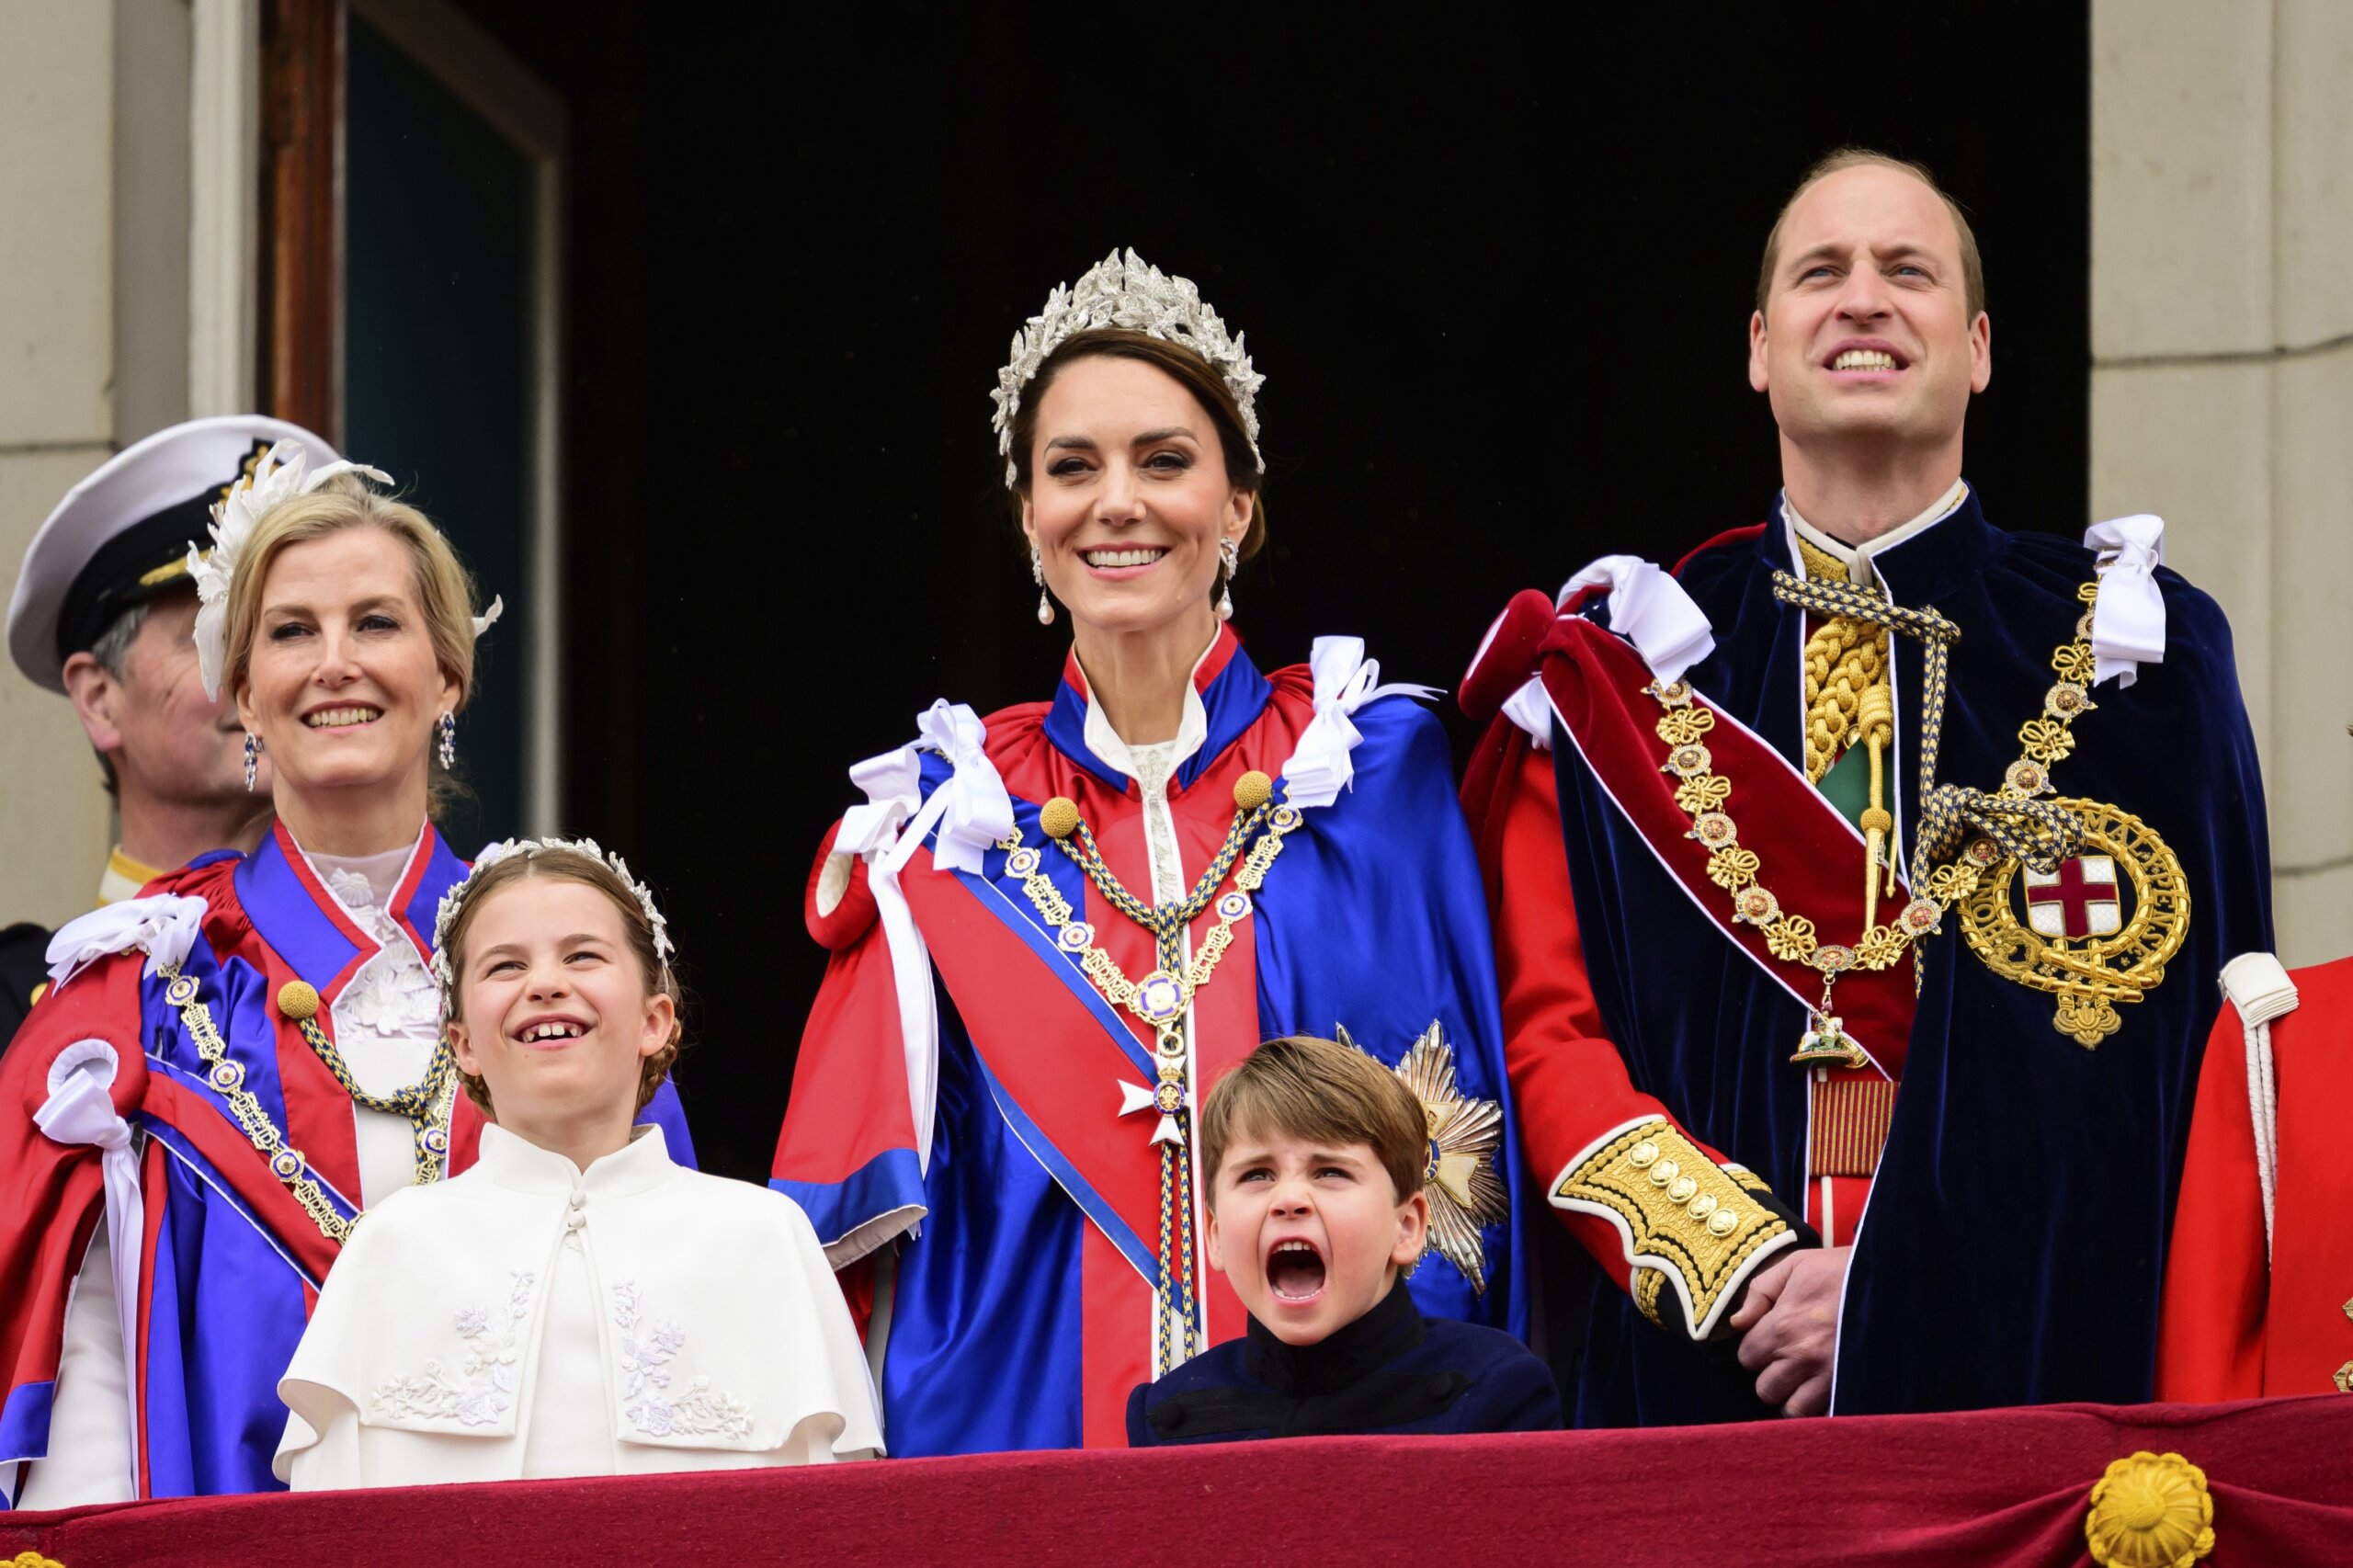 AP PHOTOS: Who wore what to King Charles III’s coronation - WTOP News